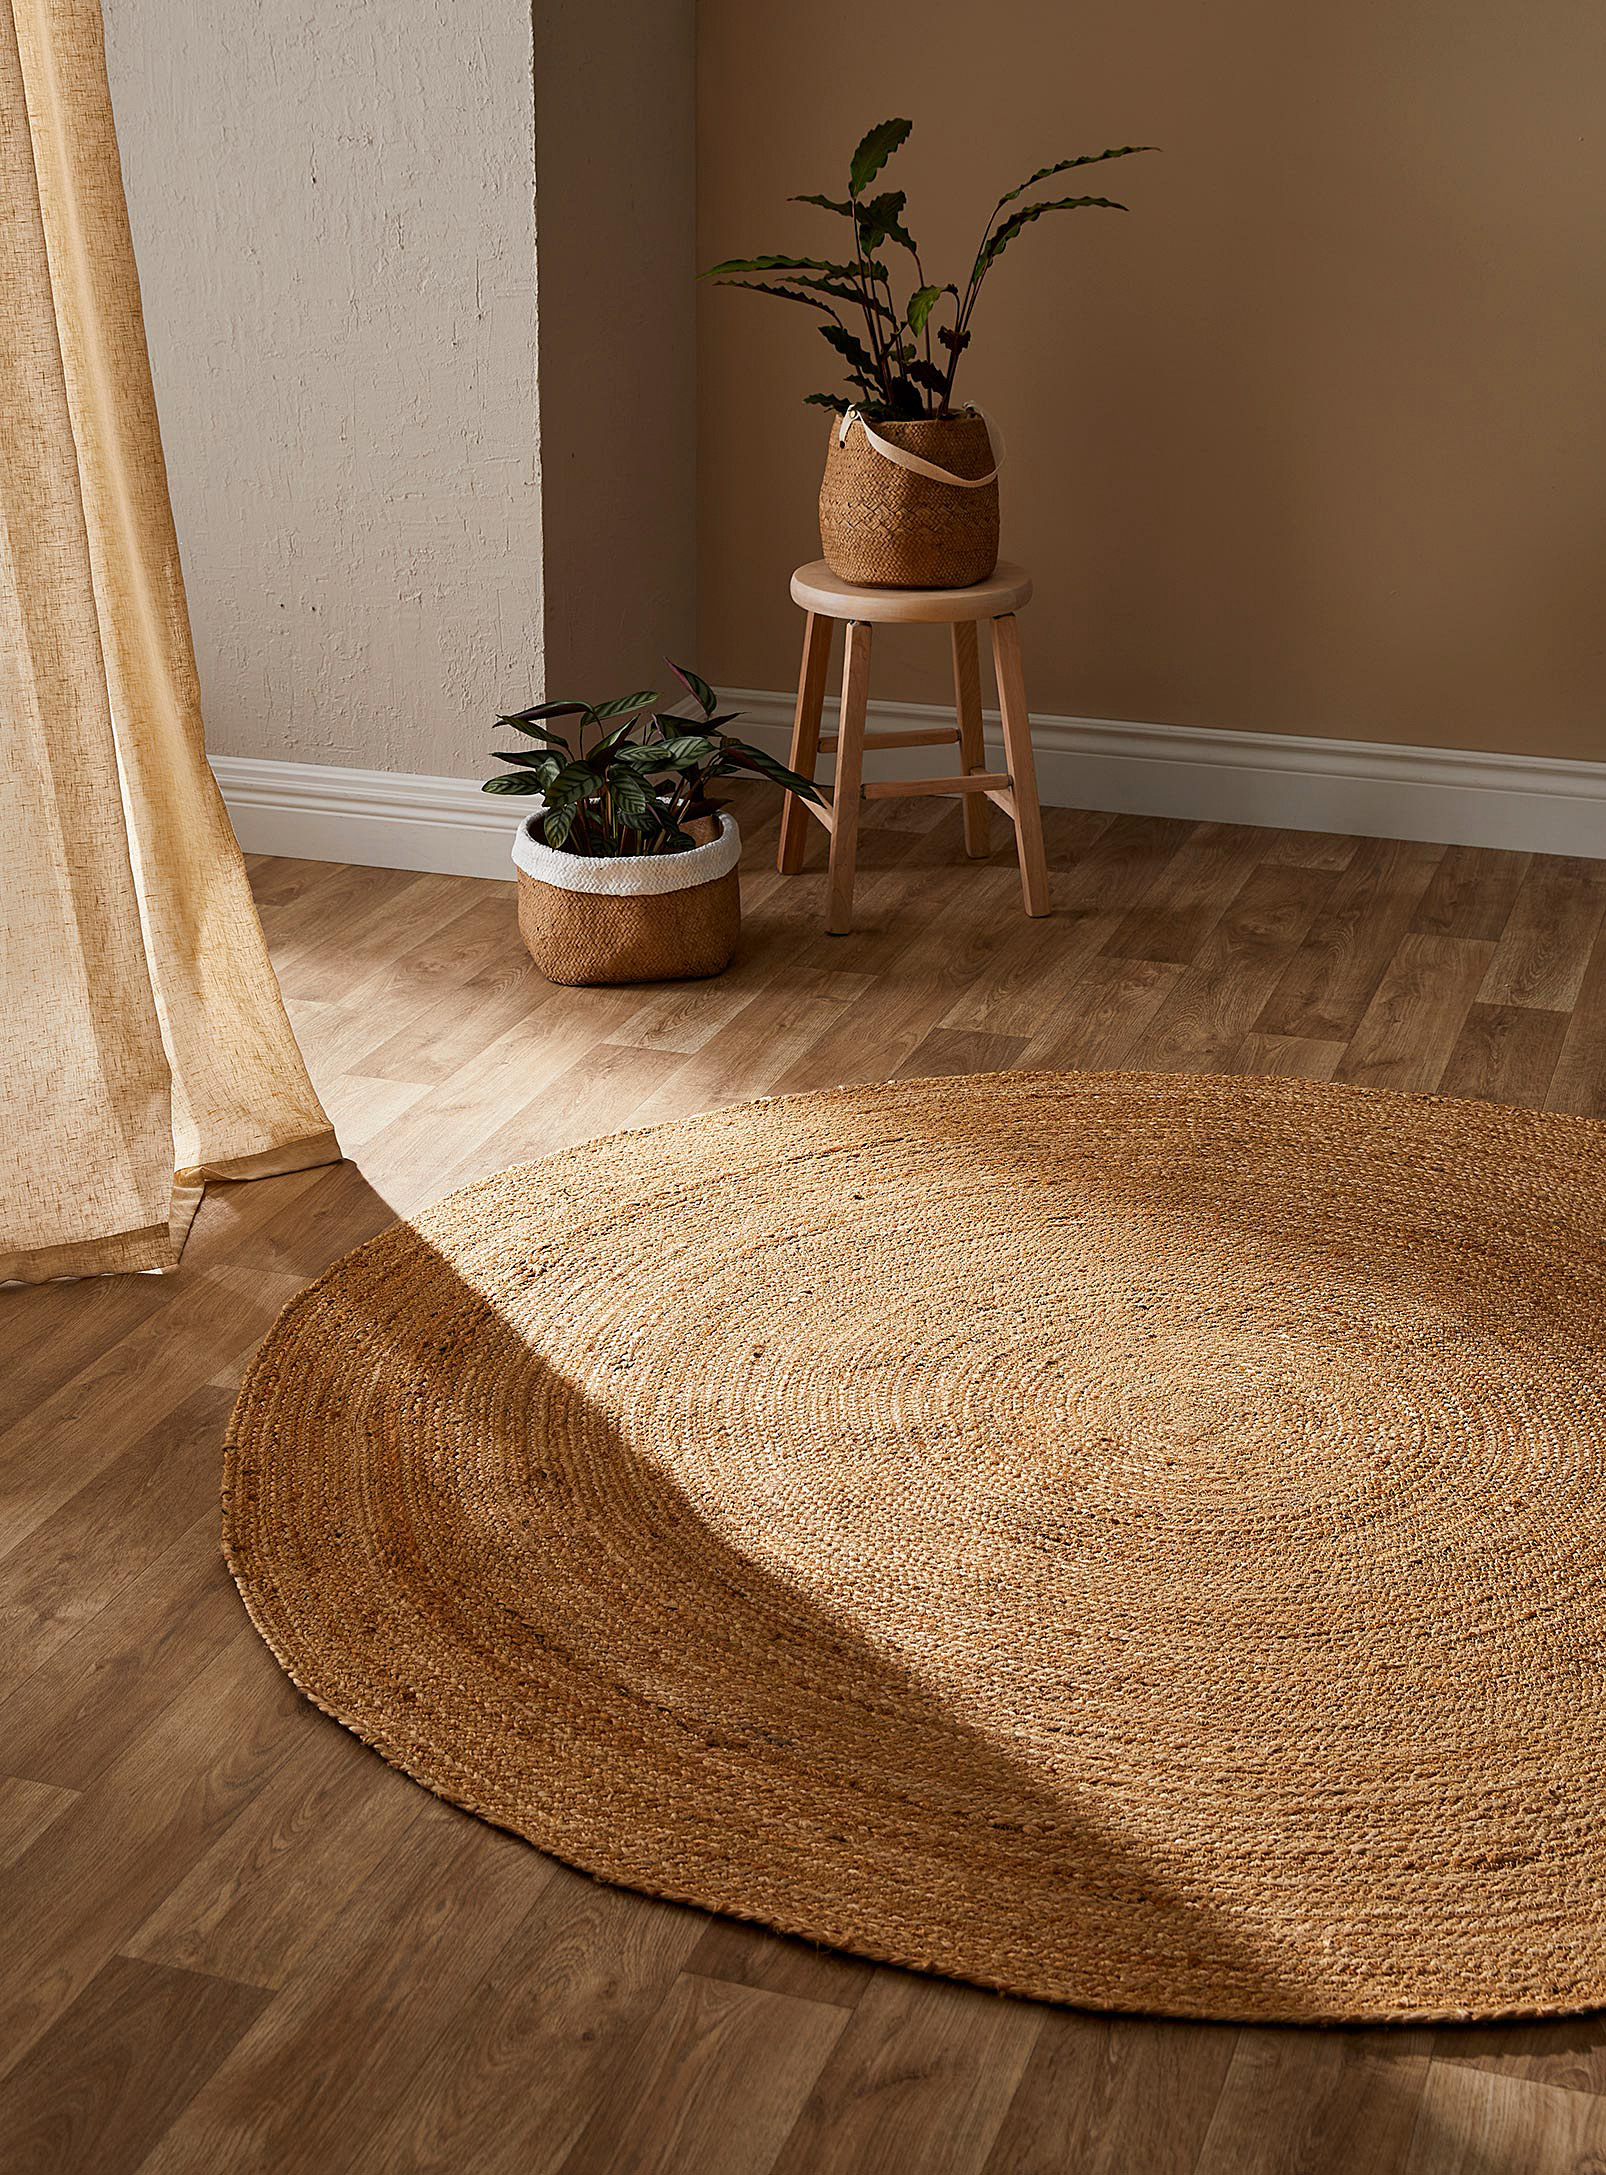 Simons Maison Braided Jute Circular Rug See Available Sizes In Medium Brown